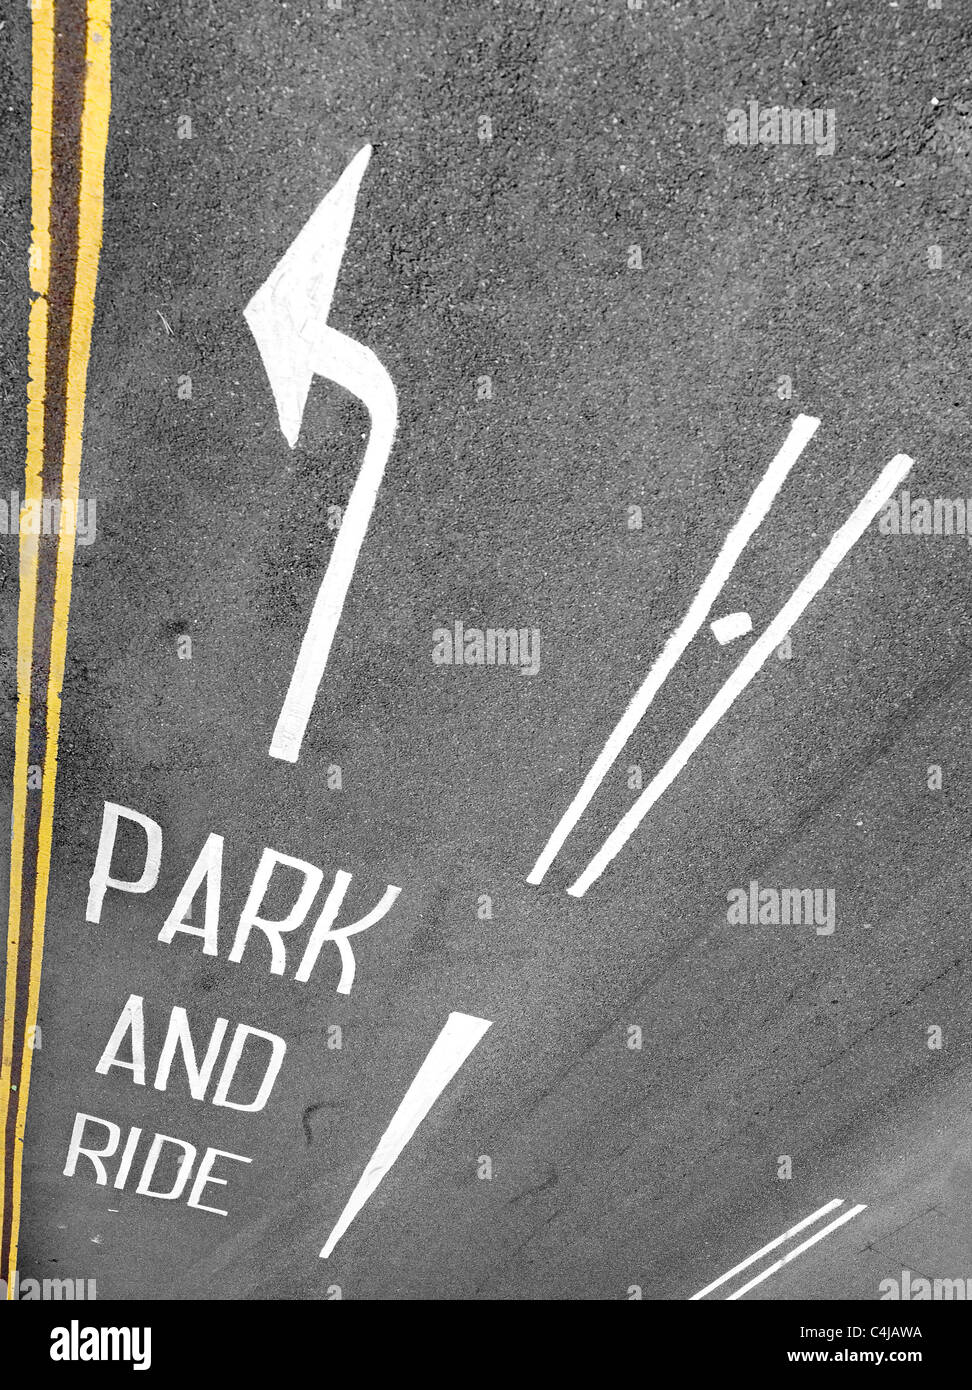 Park and Ride road marking and arrow with double yellow lines viewed from above Stock Photo